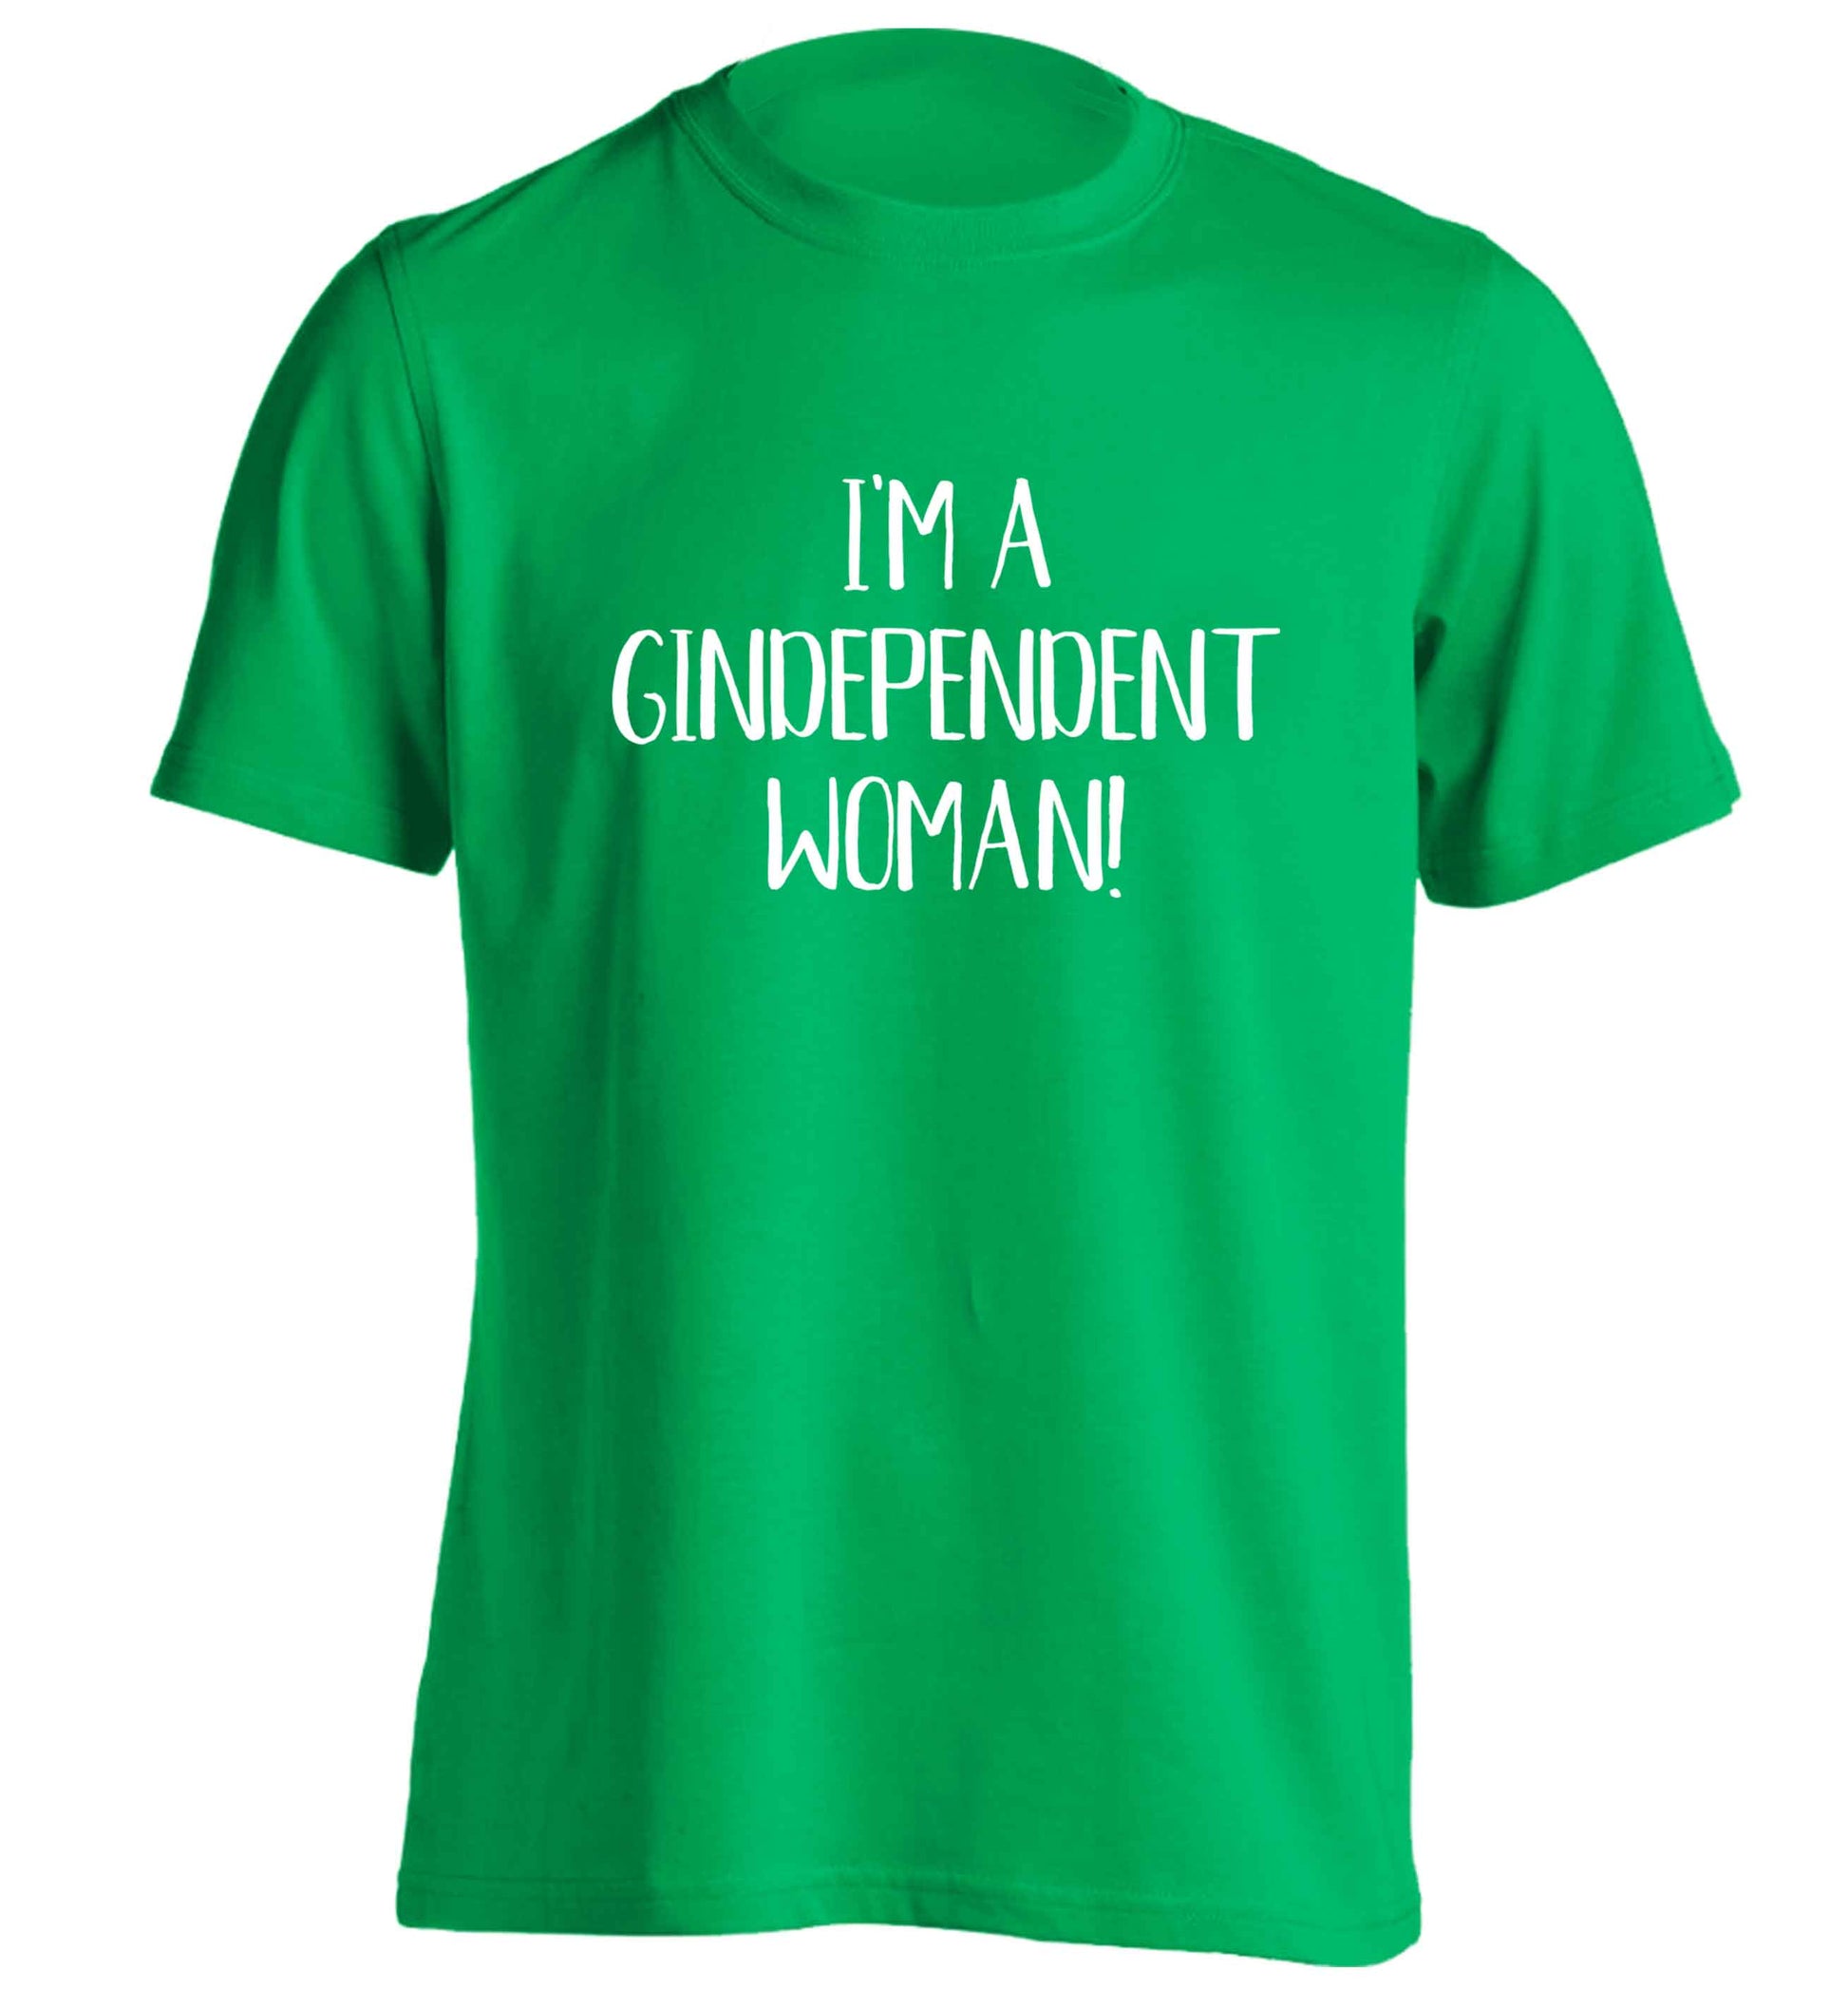 I'm a gindependent woman adults unisex green Tshirt 2XL